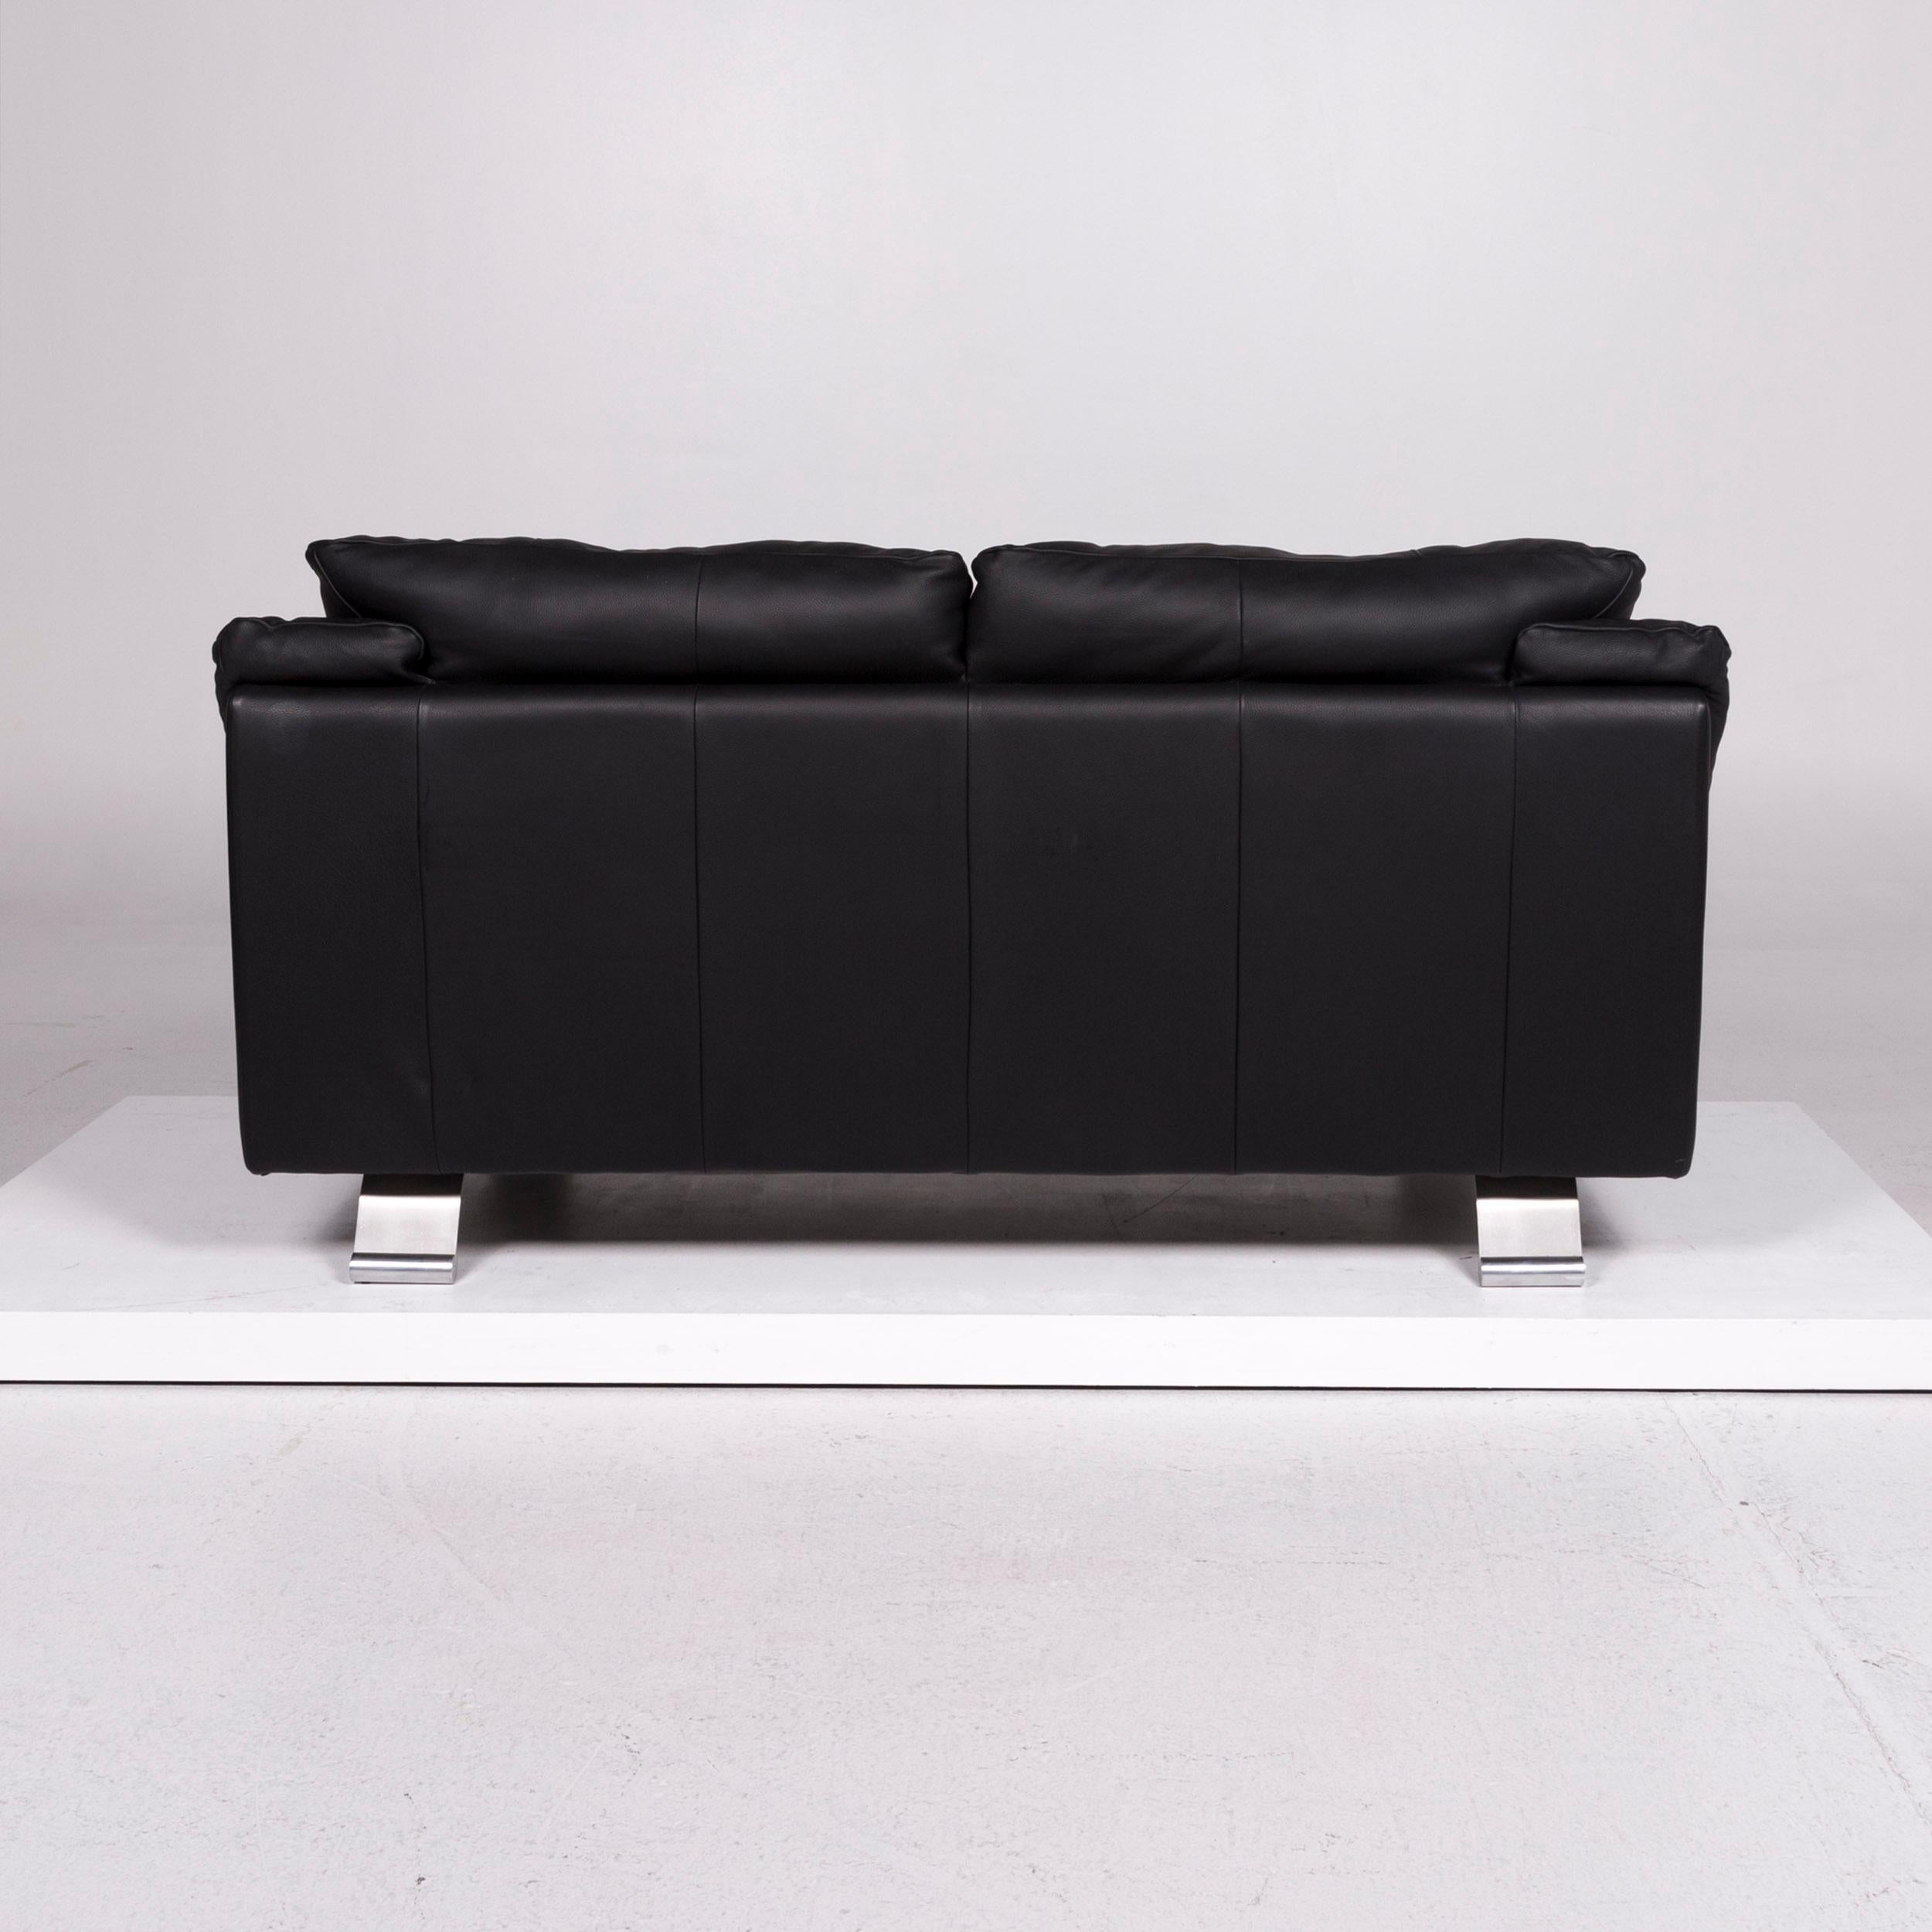 Contemporary Italsofa Leather Sofa Black Two-Seat Couch